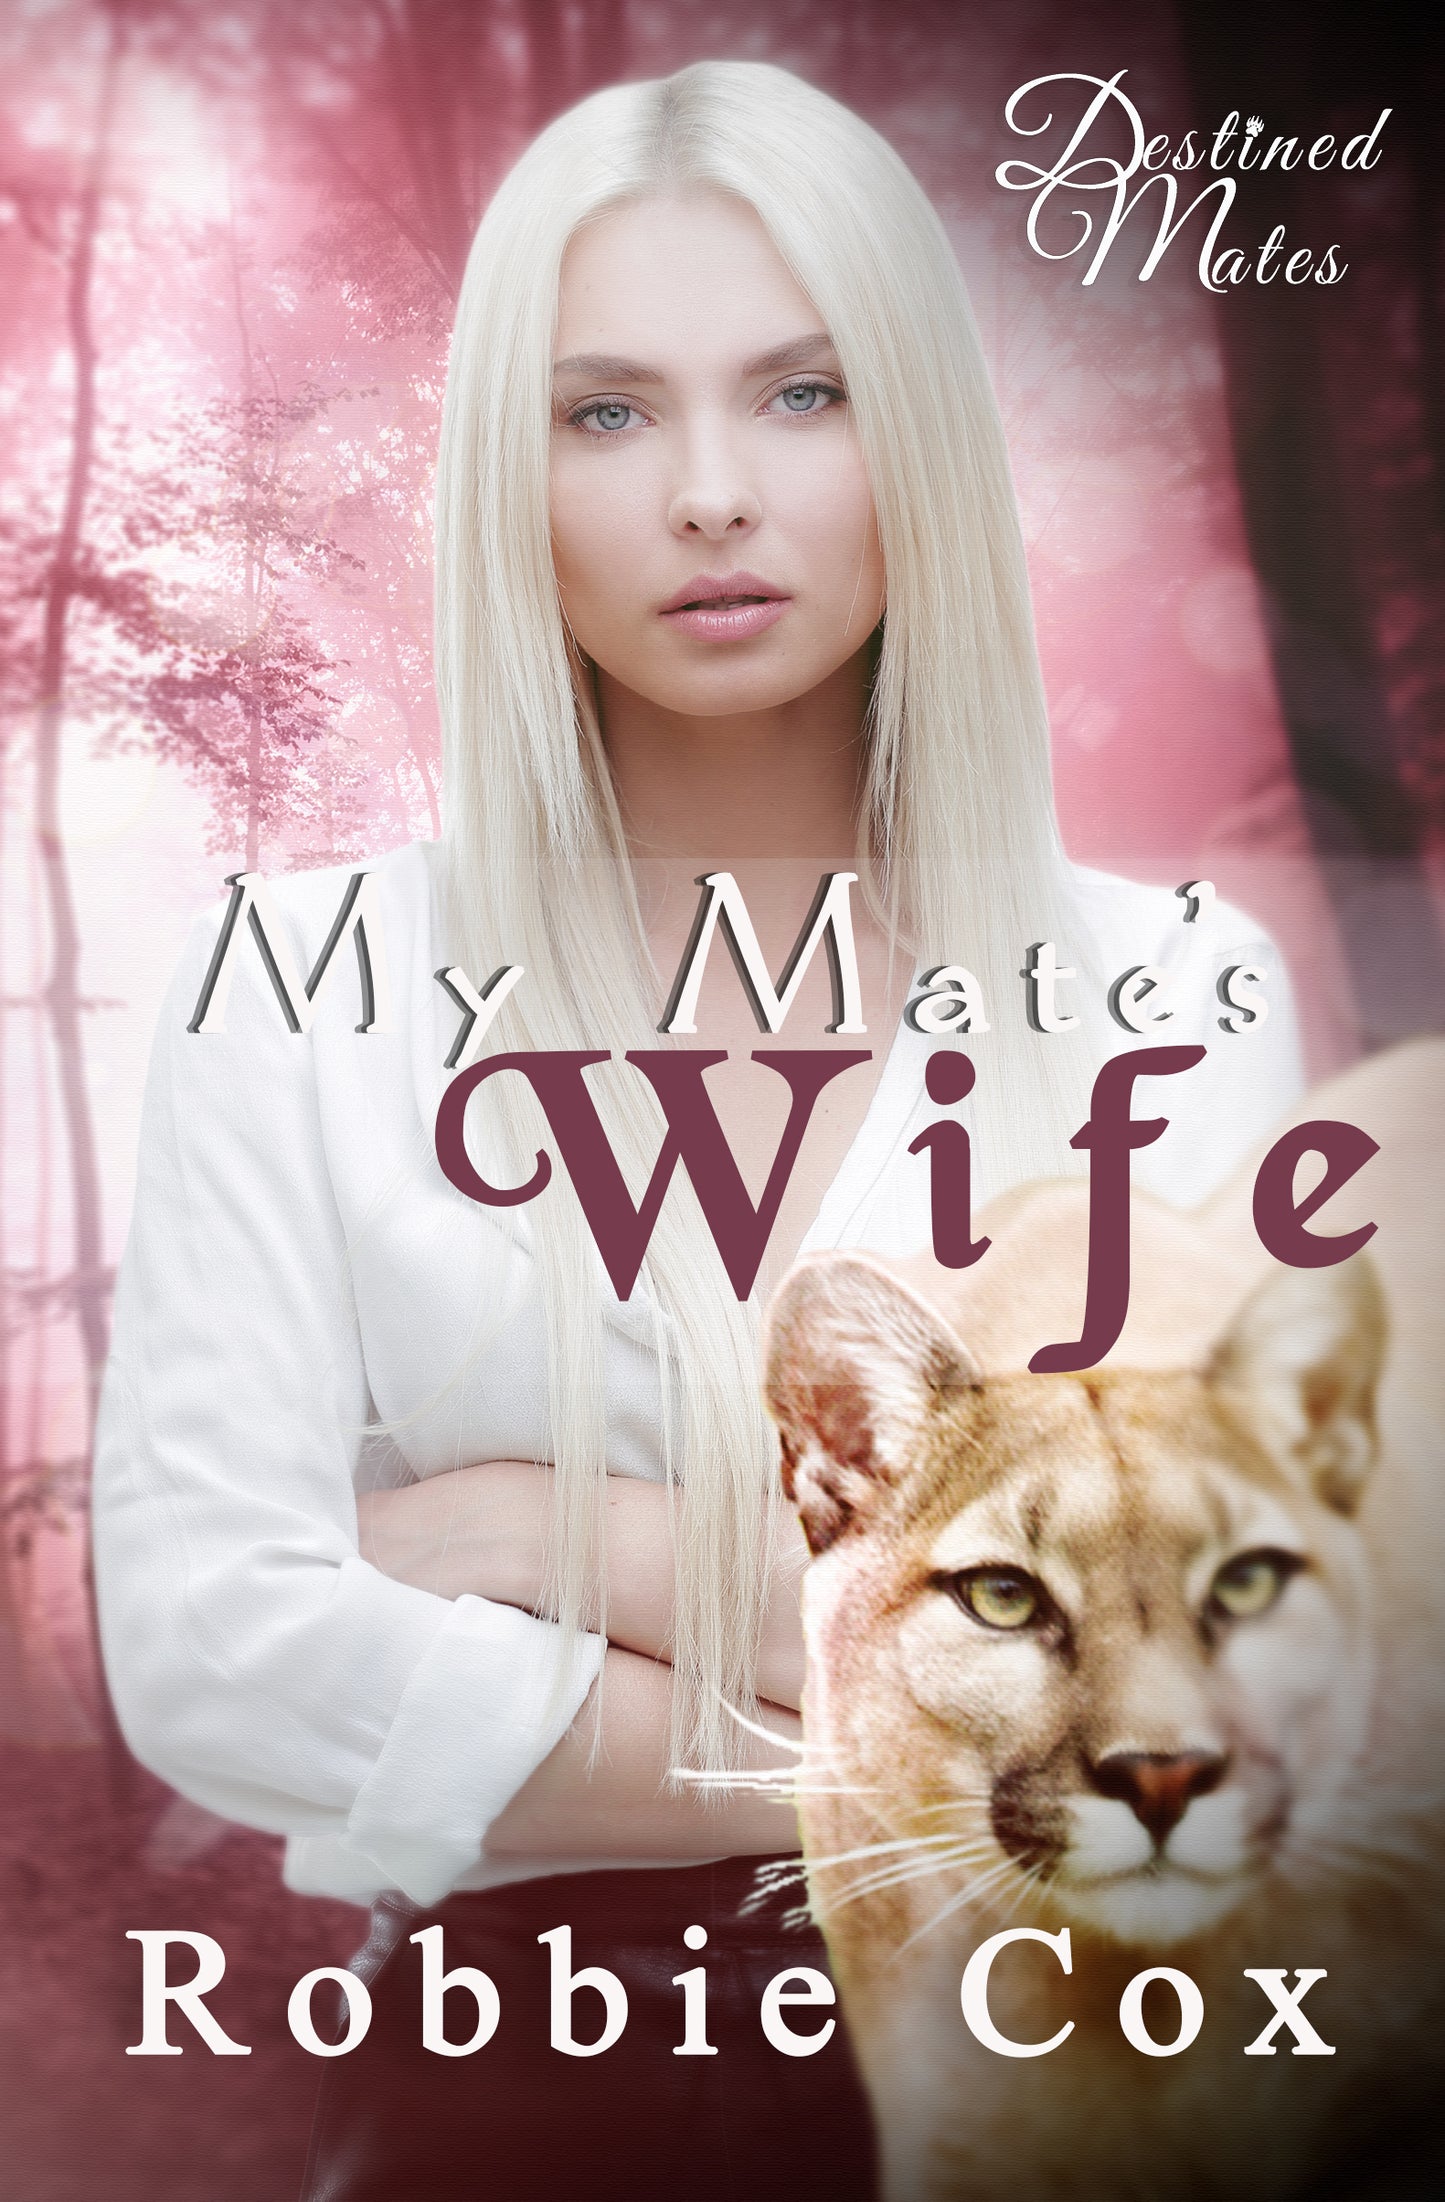 Destined Mates - Book 5 - My Mate's Wife